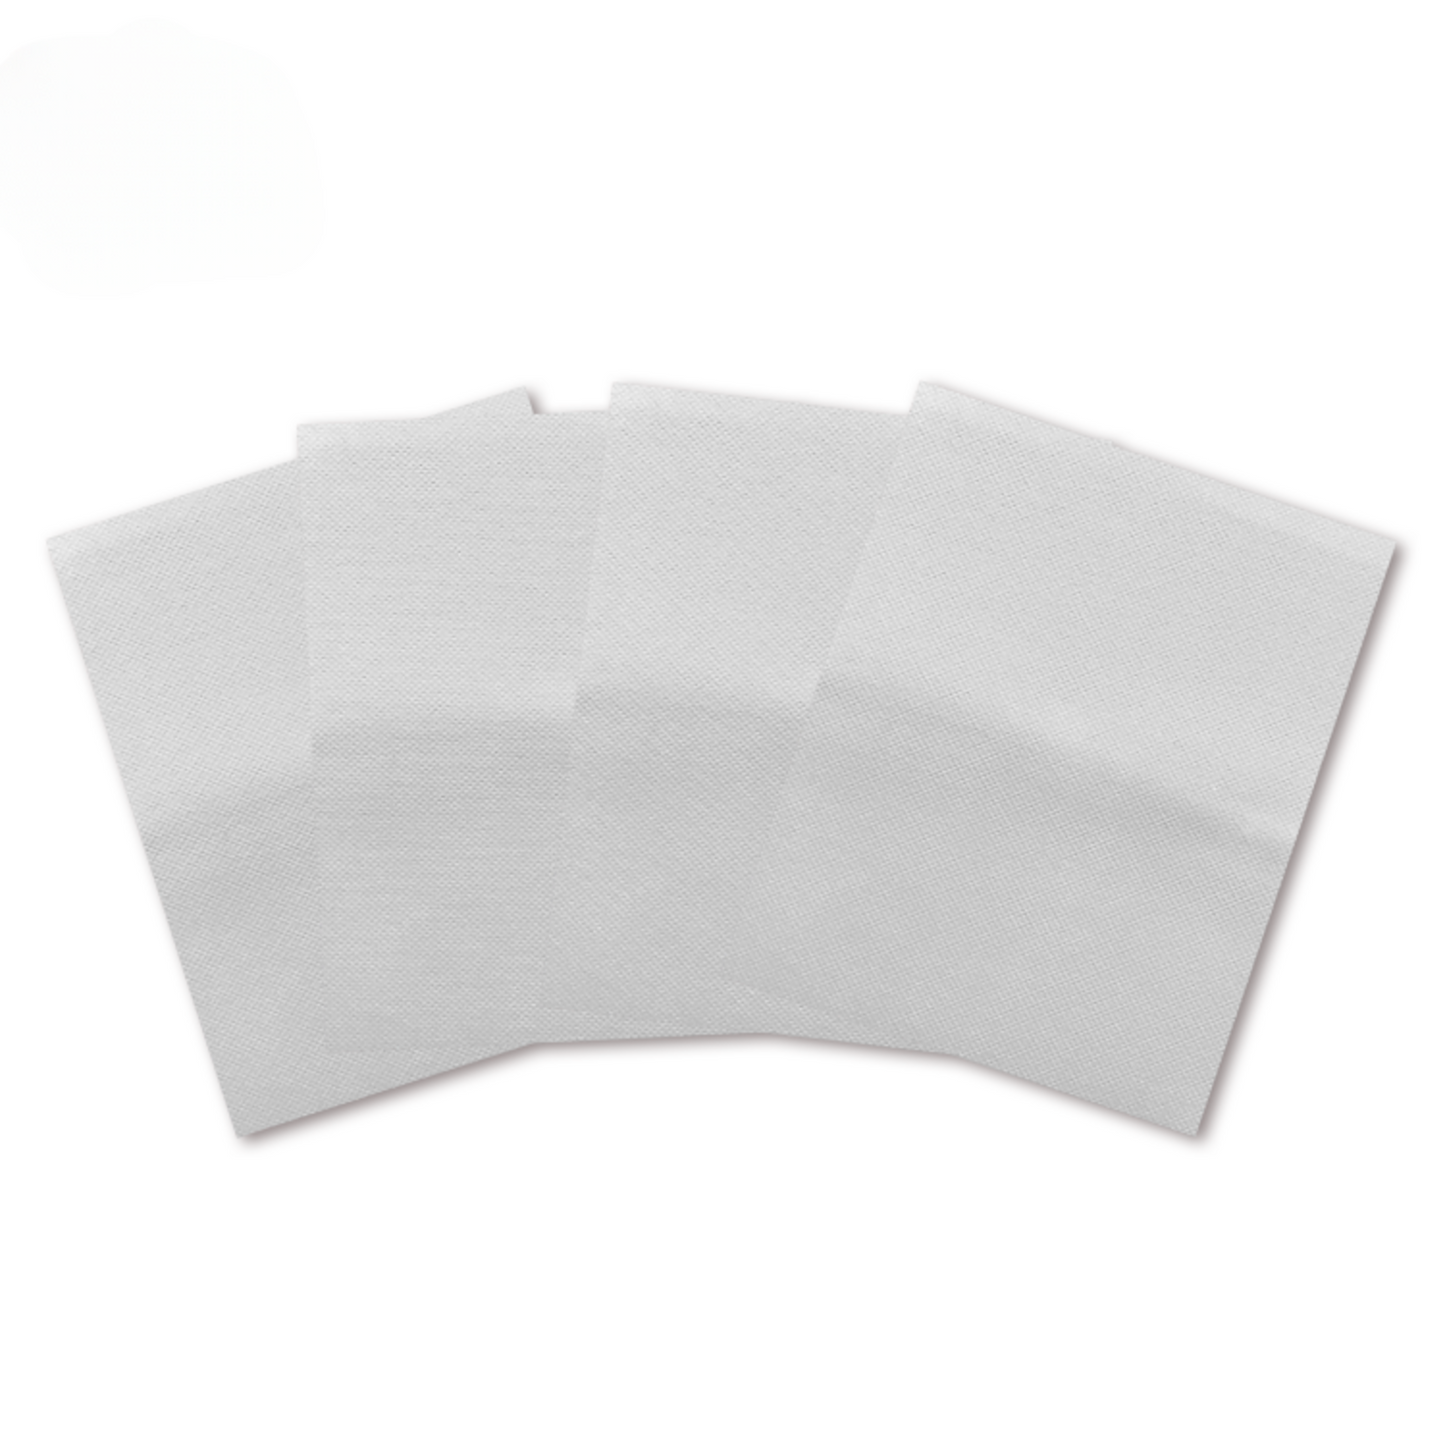 XUAN WU YAN - CAPSIUM PLASTER - PAIN RELIEF GEL PATCH RELIEF - COOL (4 PIECE)